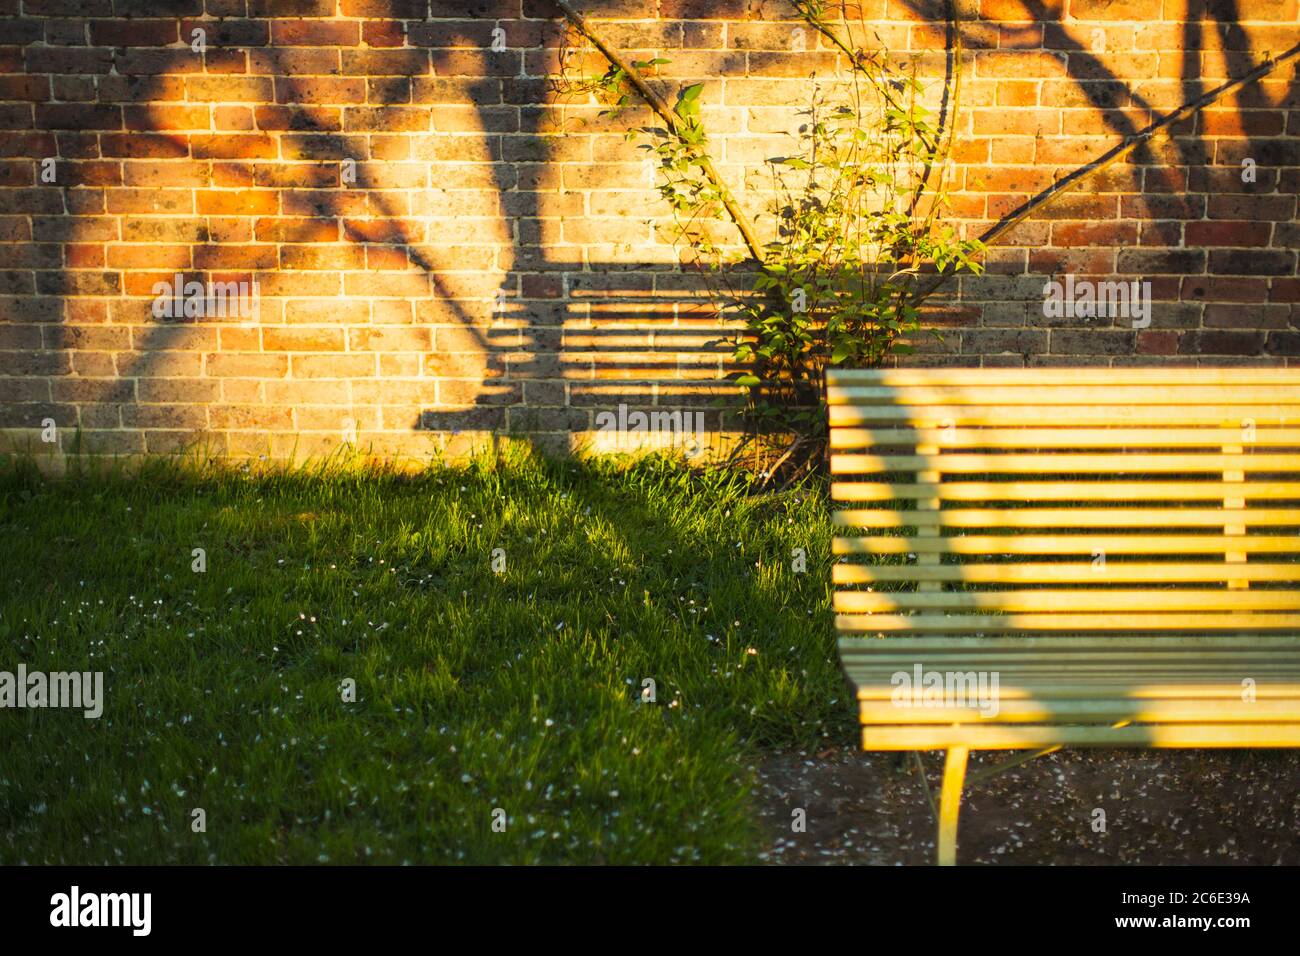 Shadow of bench on brick wall in sunny garden Stock Photo